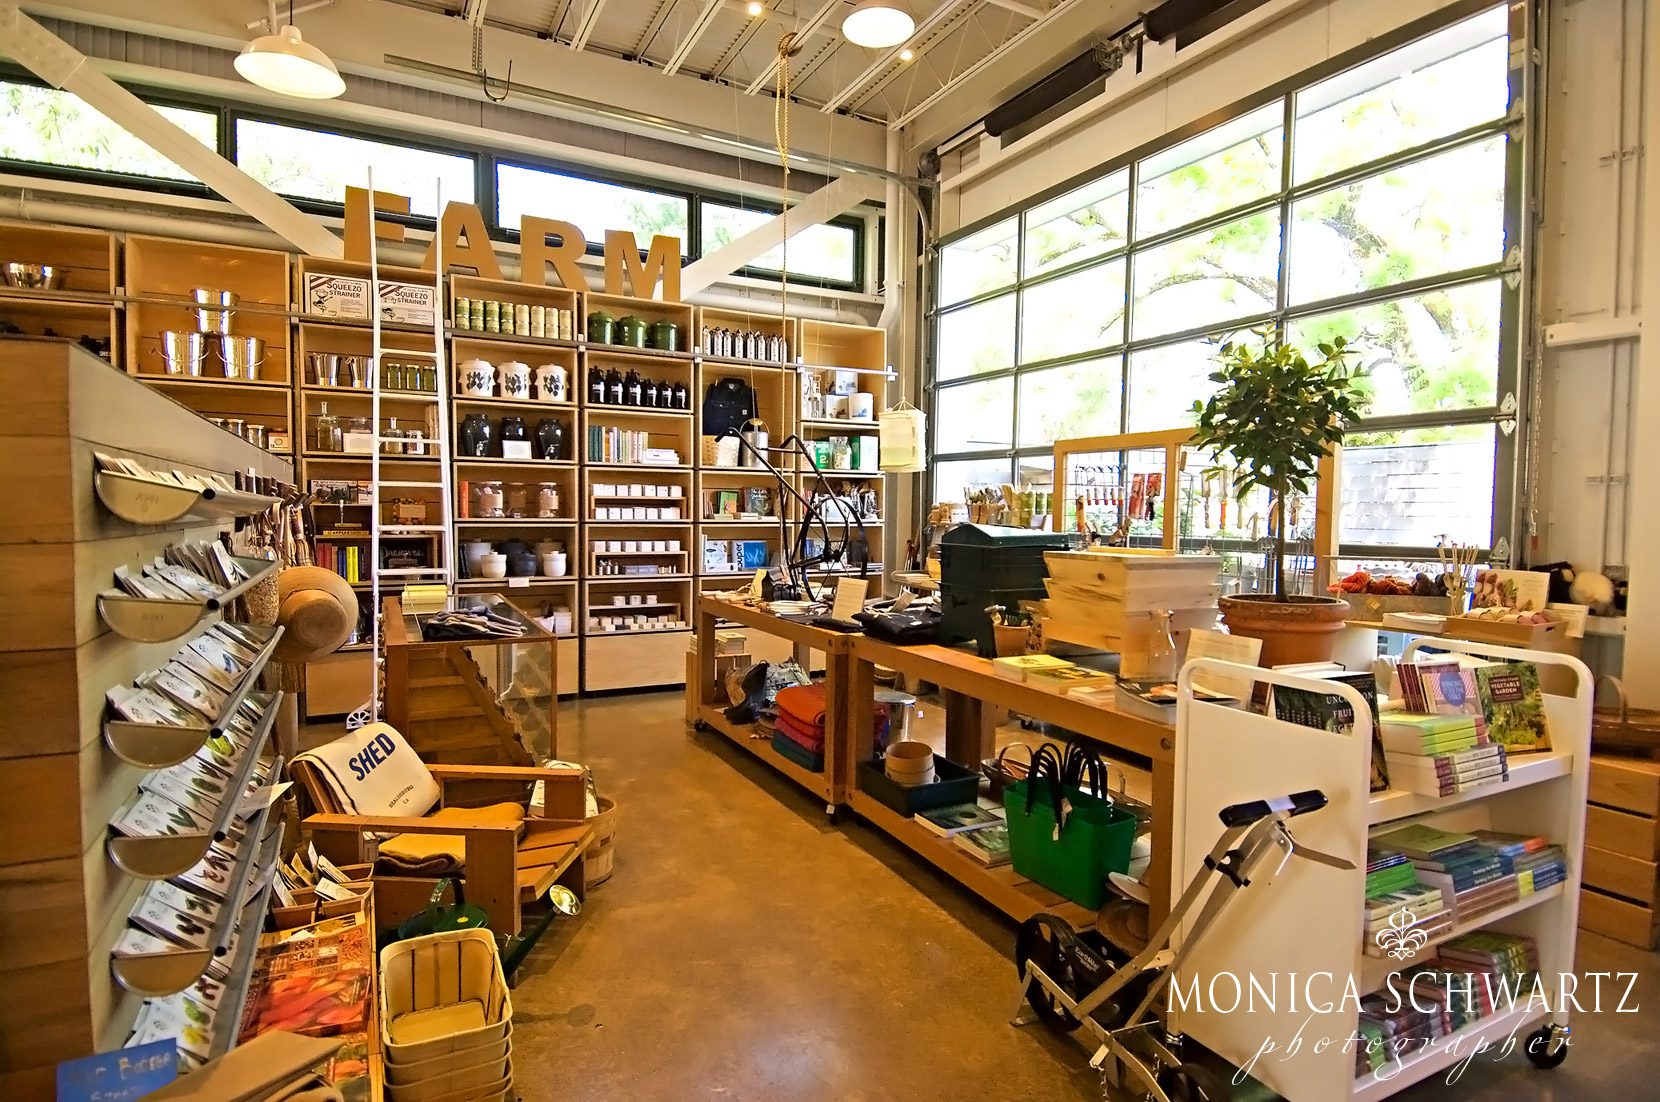 Farm-utensils-and-crafts-at-the-Shed-in-Healdsburg-California